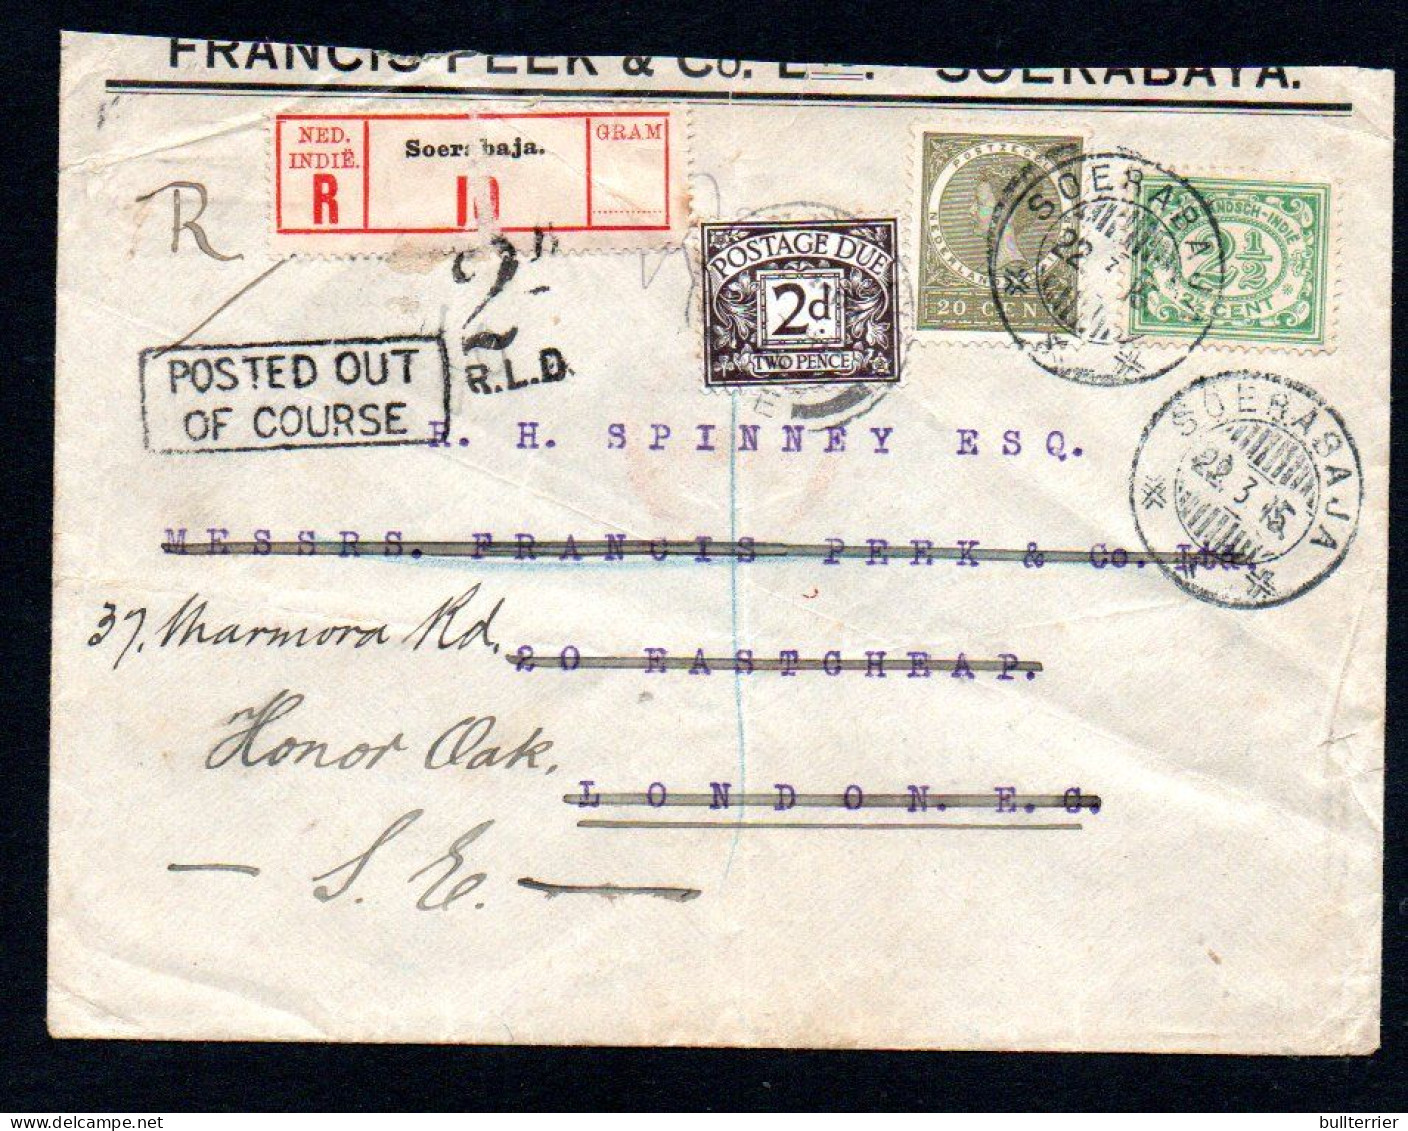 NETHERLANDS INDIES -1915 - REGITERED COVER TO LONDON ,POSTED OUT OF COURSE , POSTAGE DUE ADDED AND REDIRECTED, - Netherlands Indies